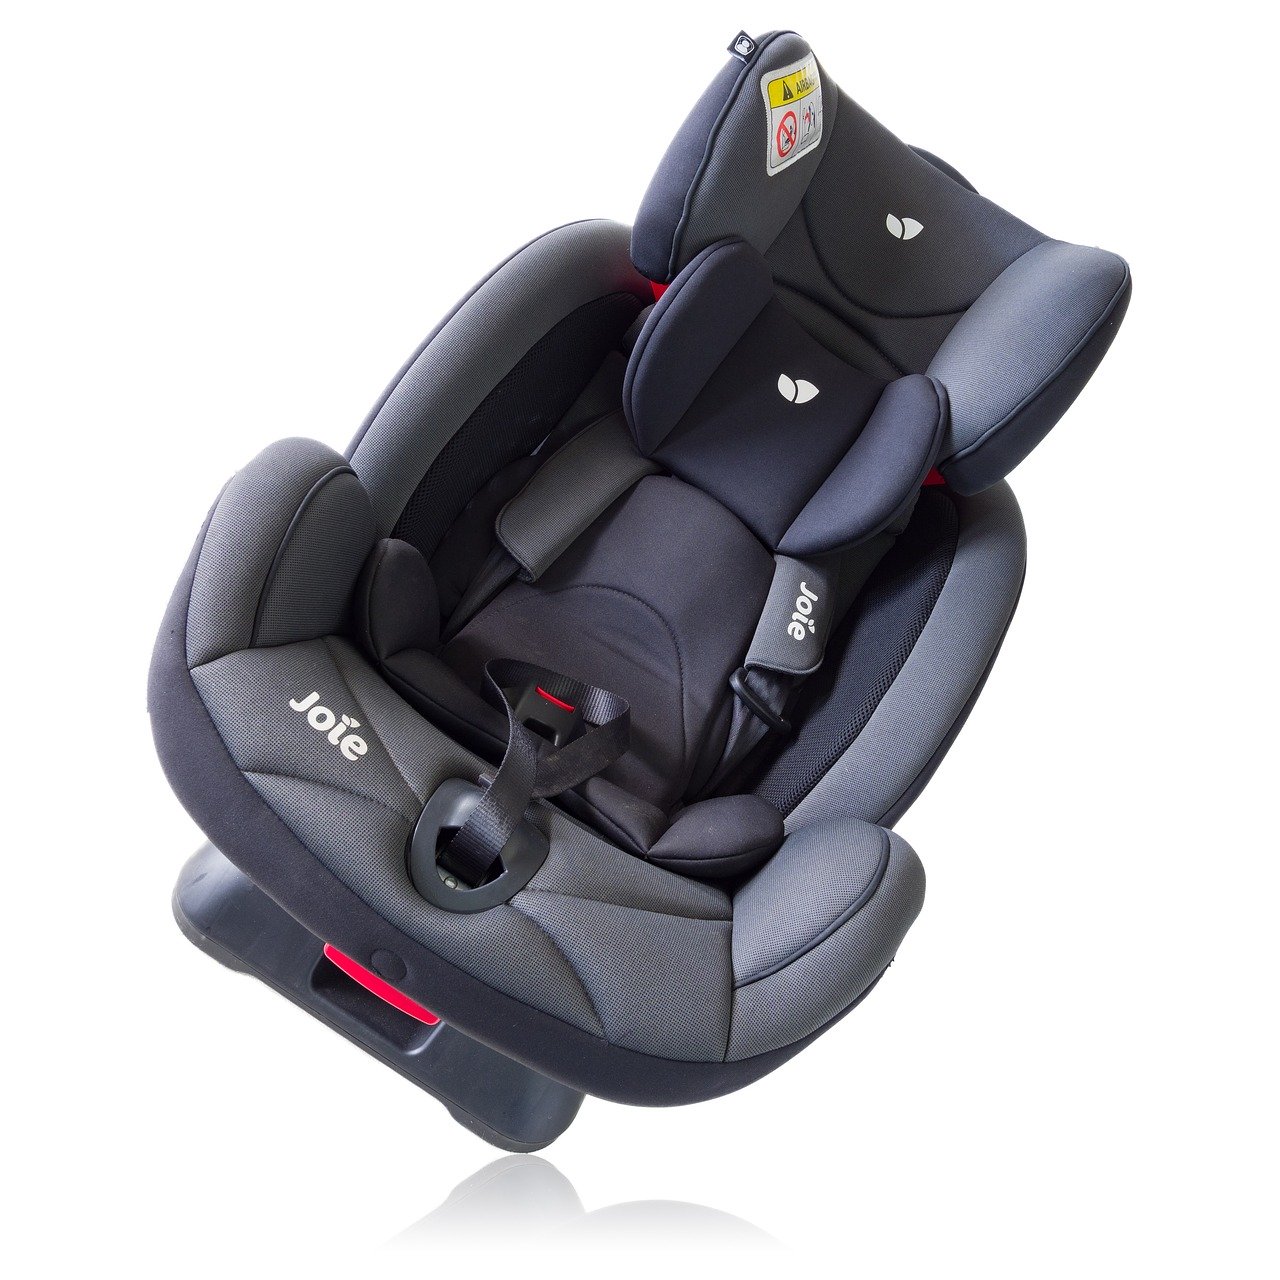 Travel with a baby, car safety seats